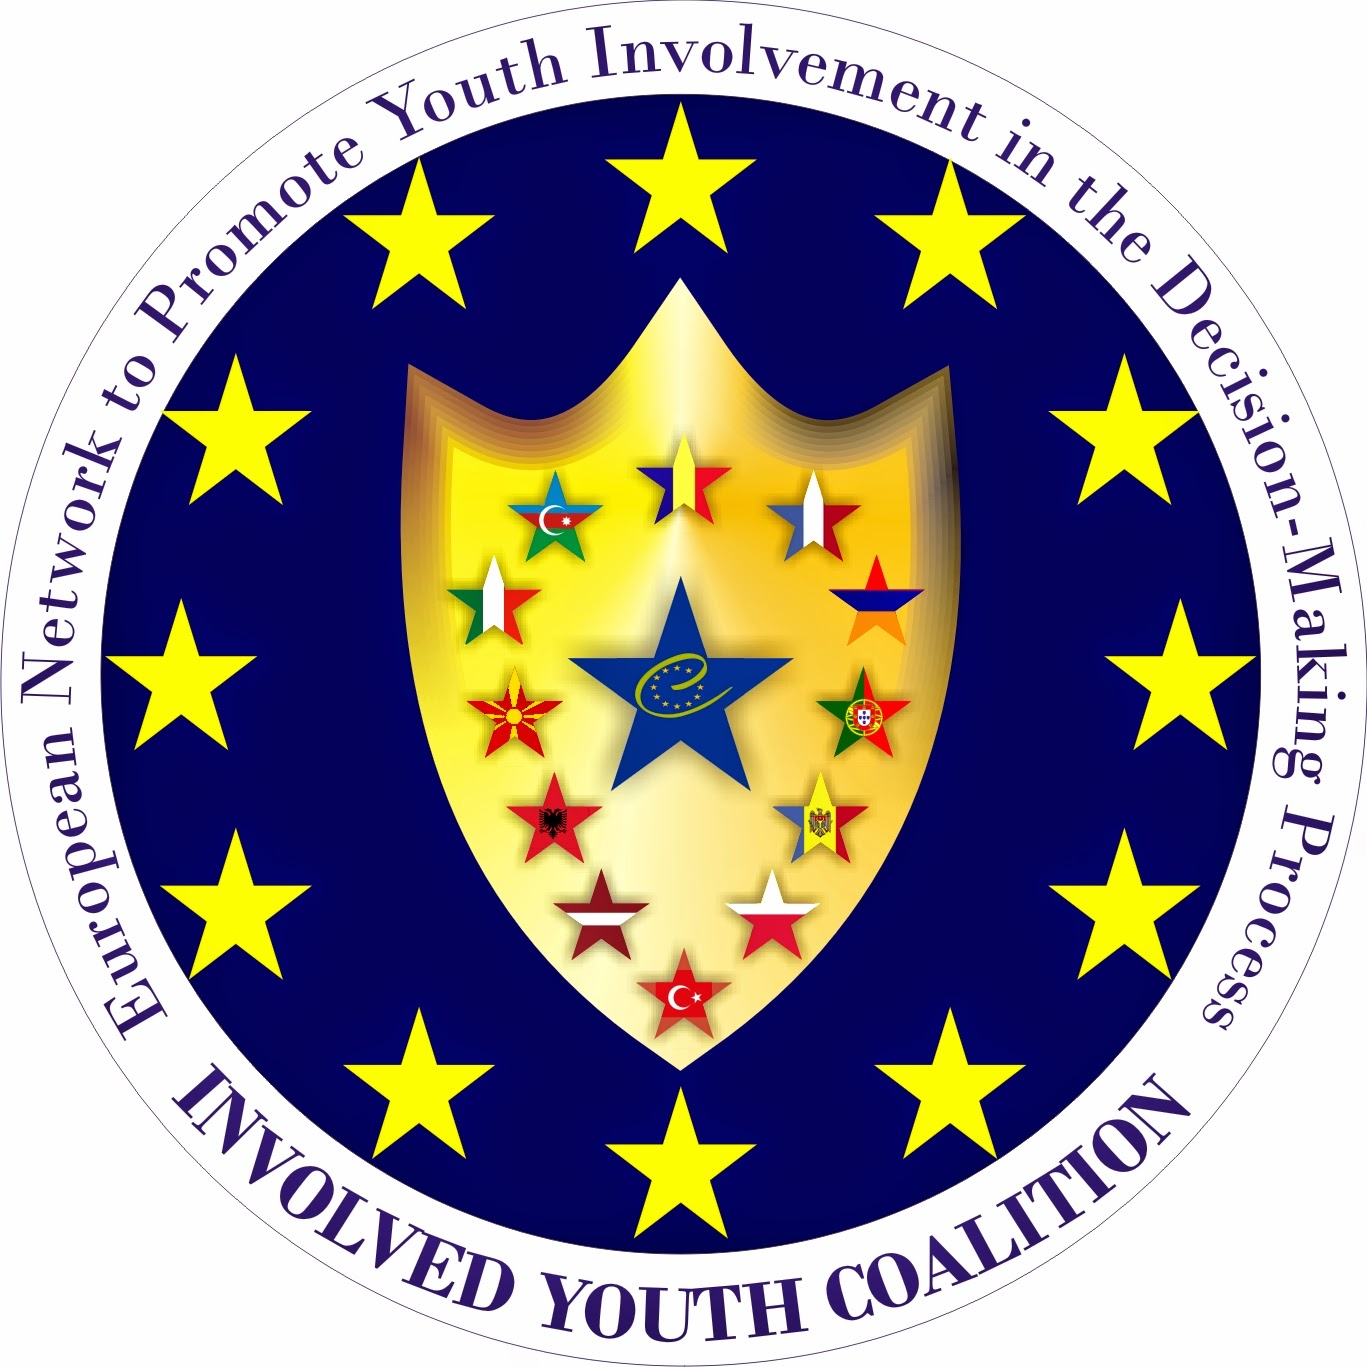 Involved Youth Coalition